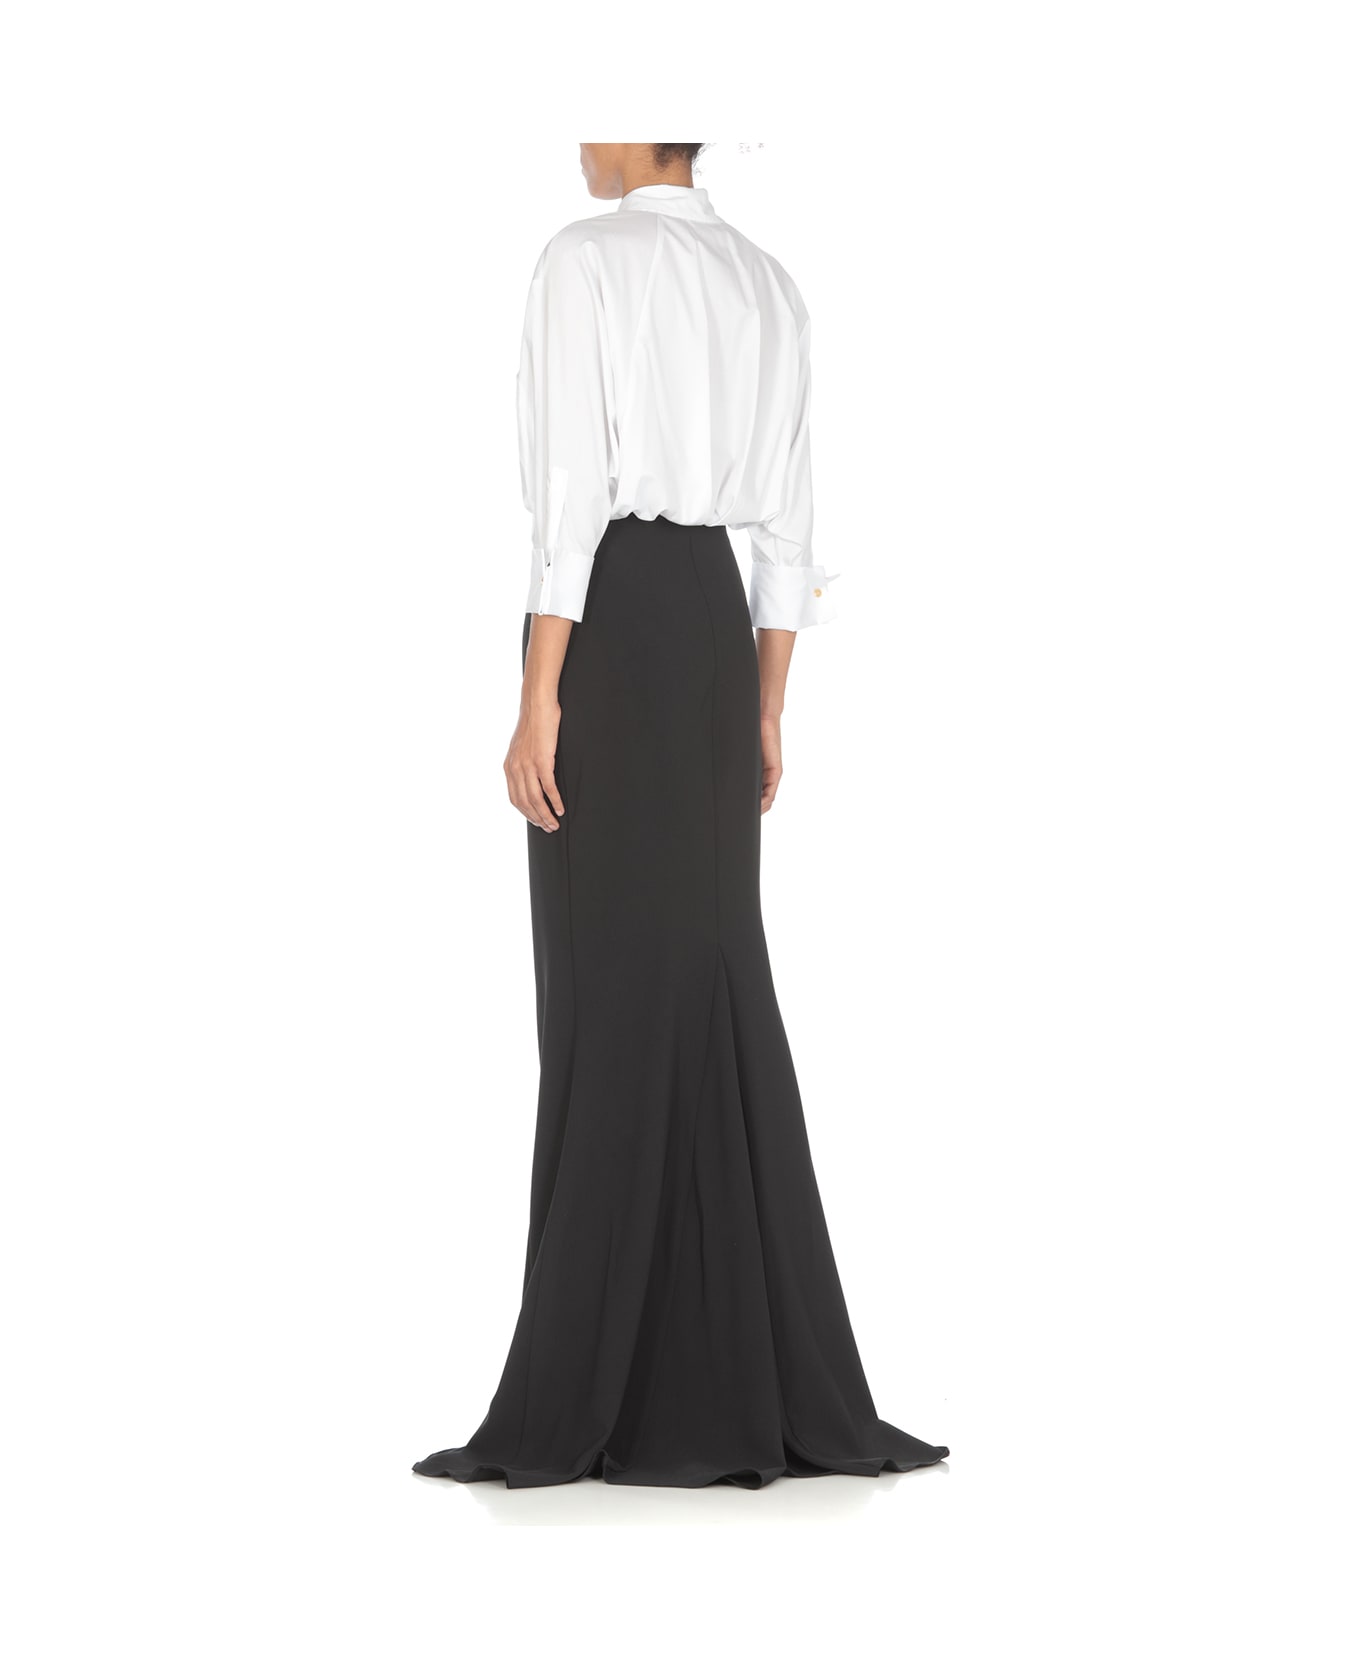 Elisabetta Franchi Combined Red Carpet Dress In Cotton And Crepe - White/black スカート